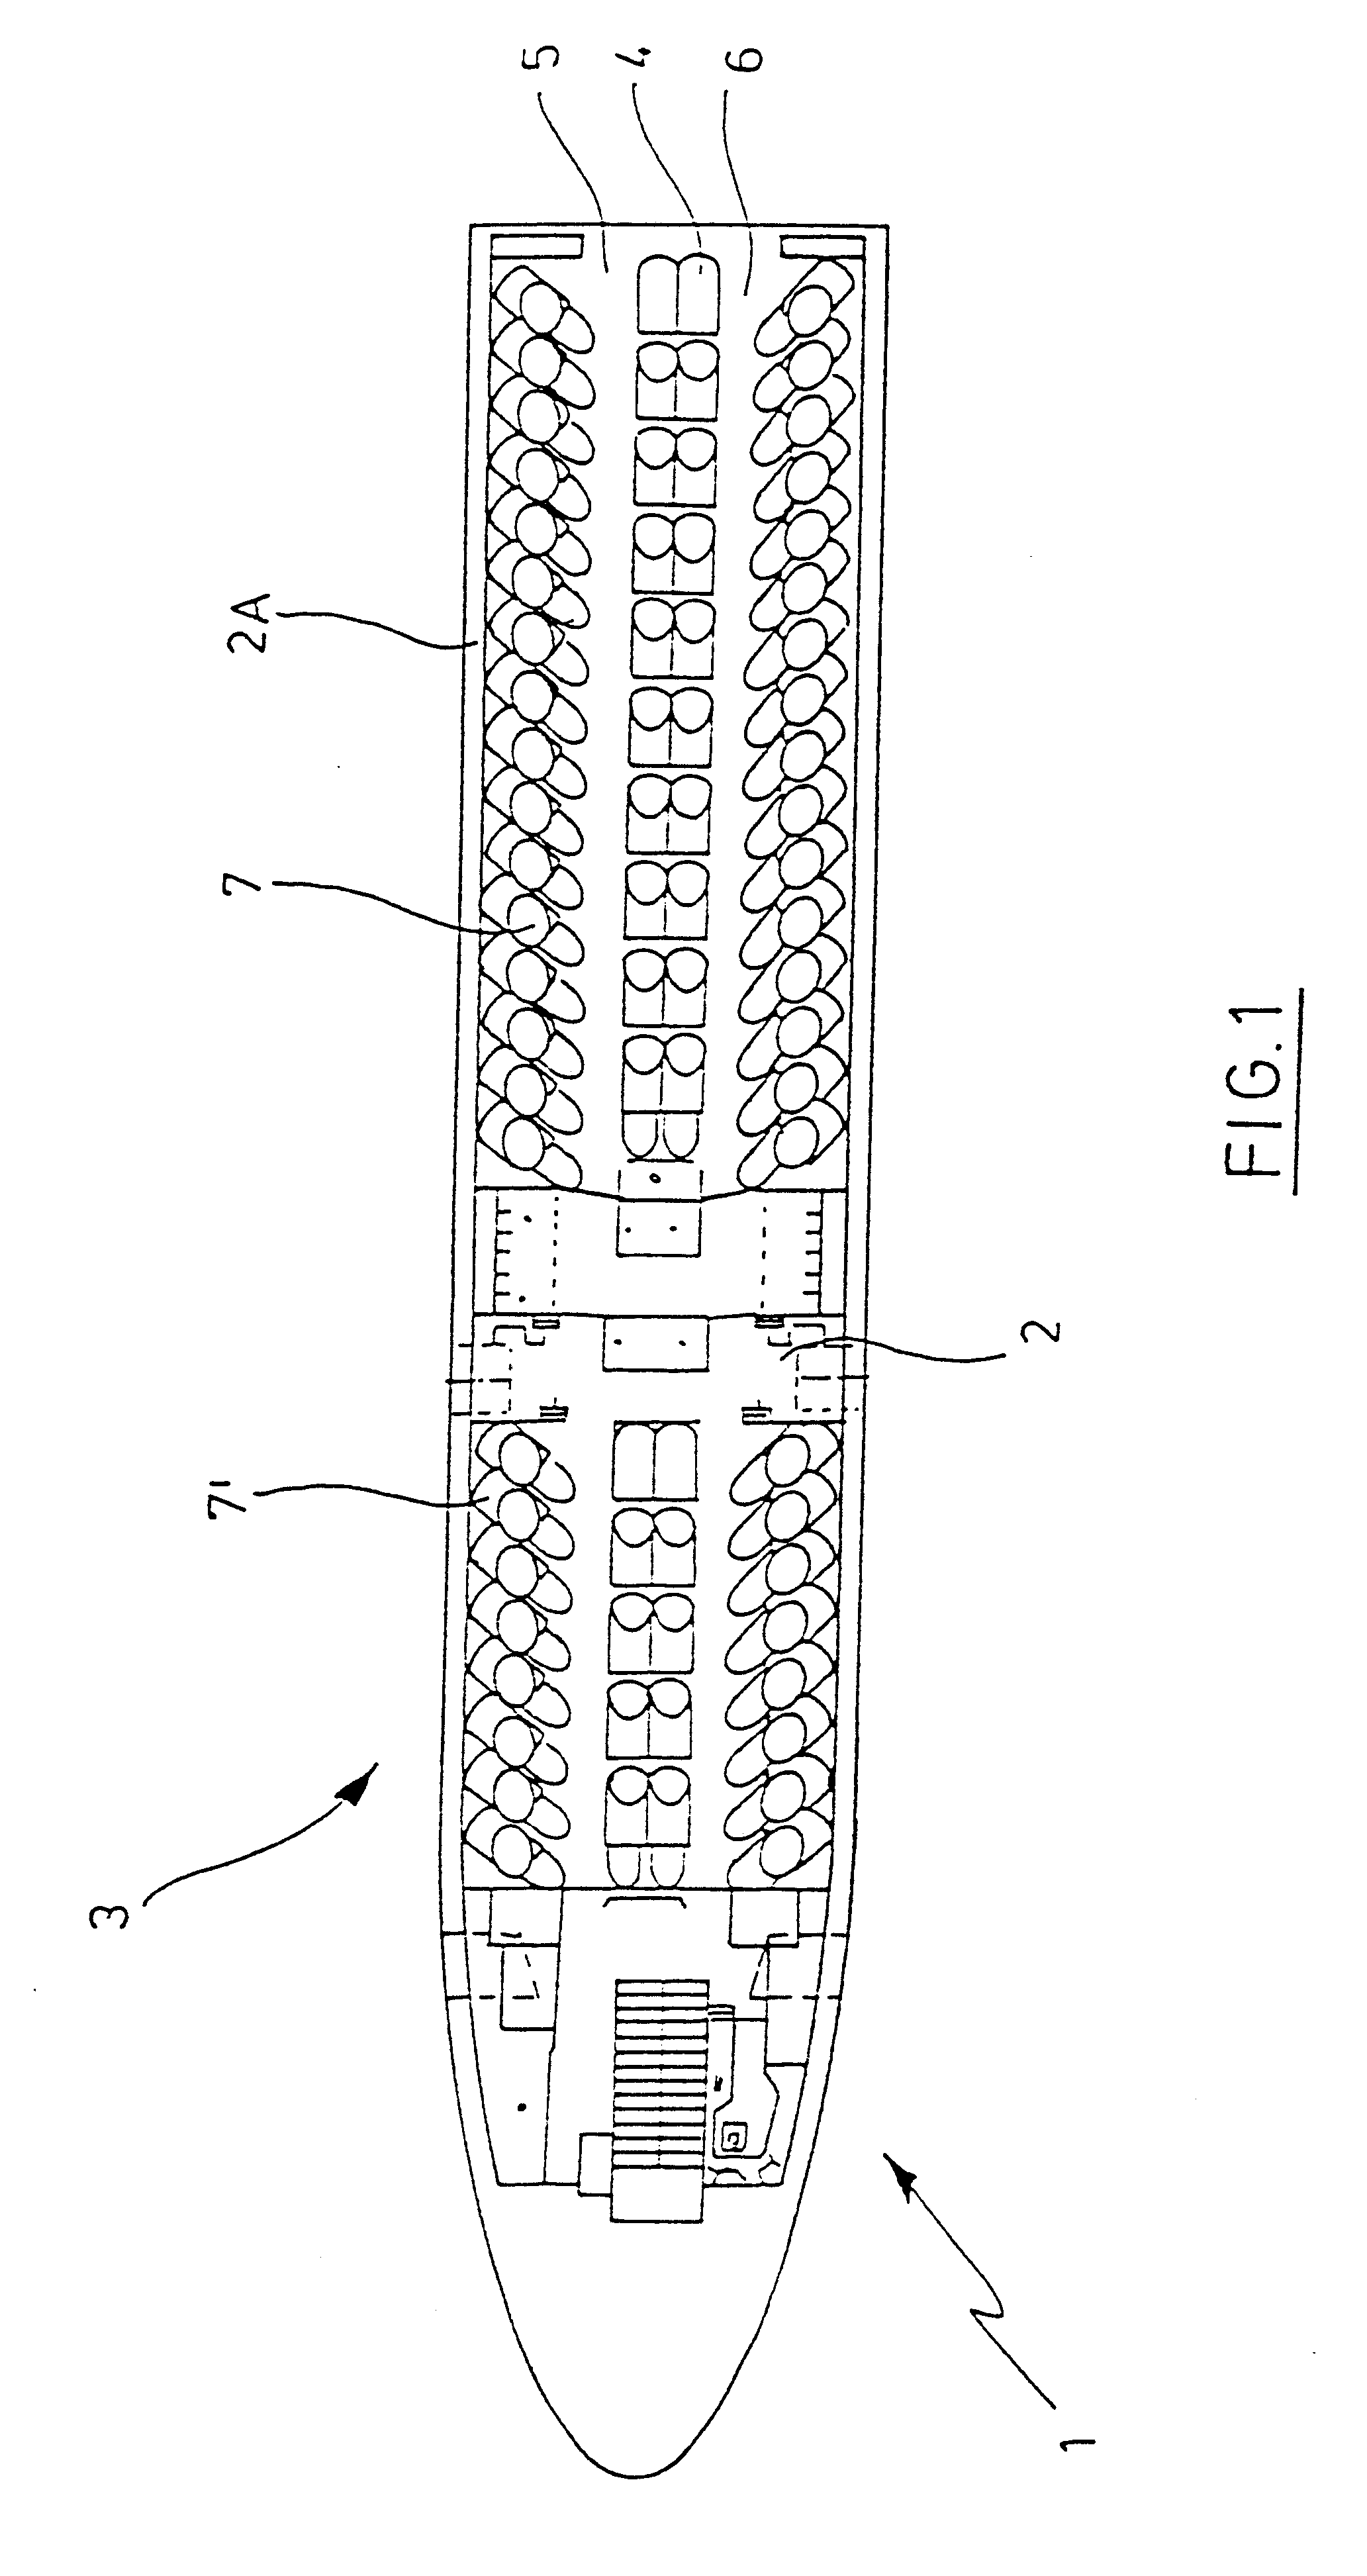 Aircraft passenger cabin with rotatable passenger seats